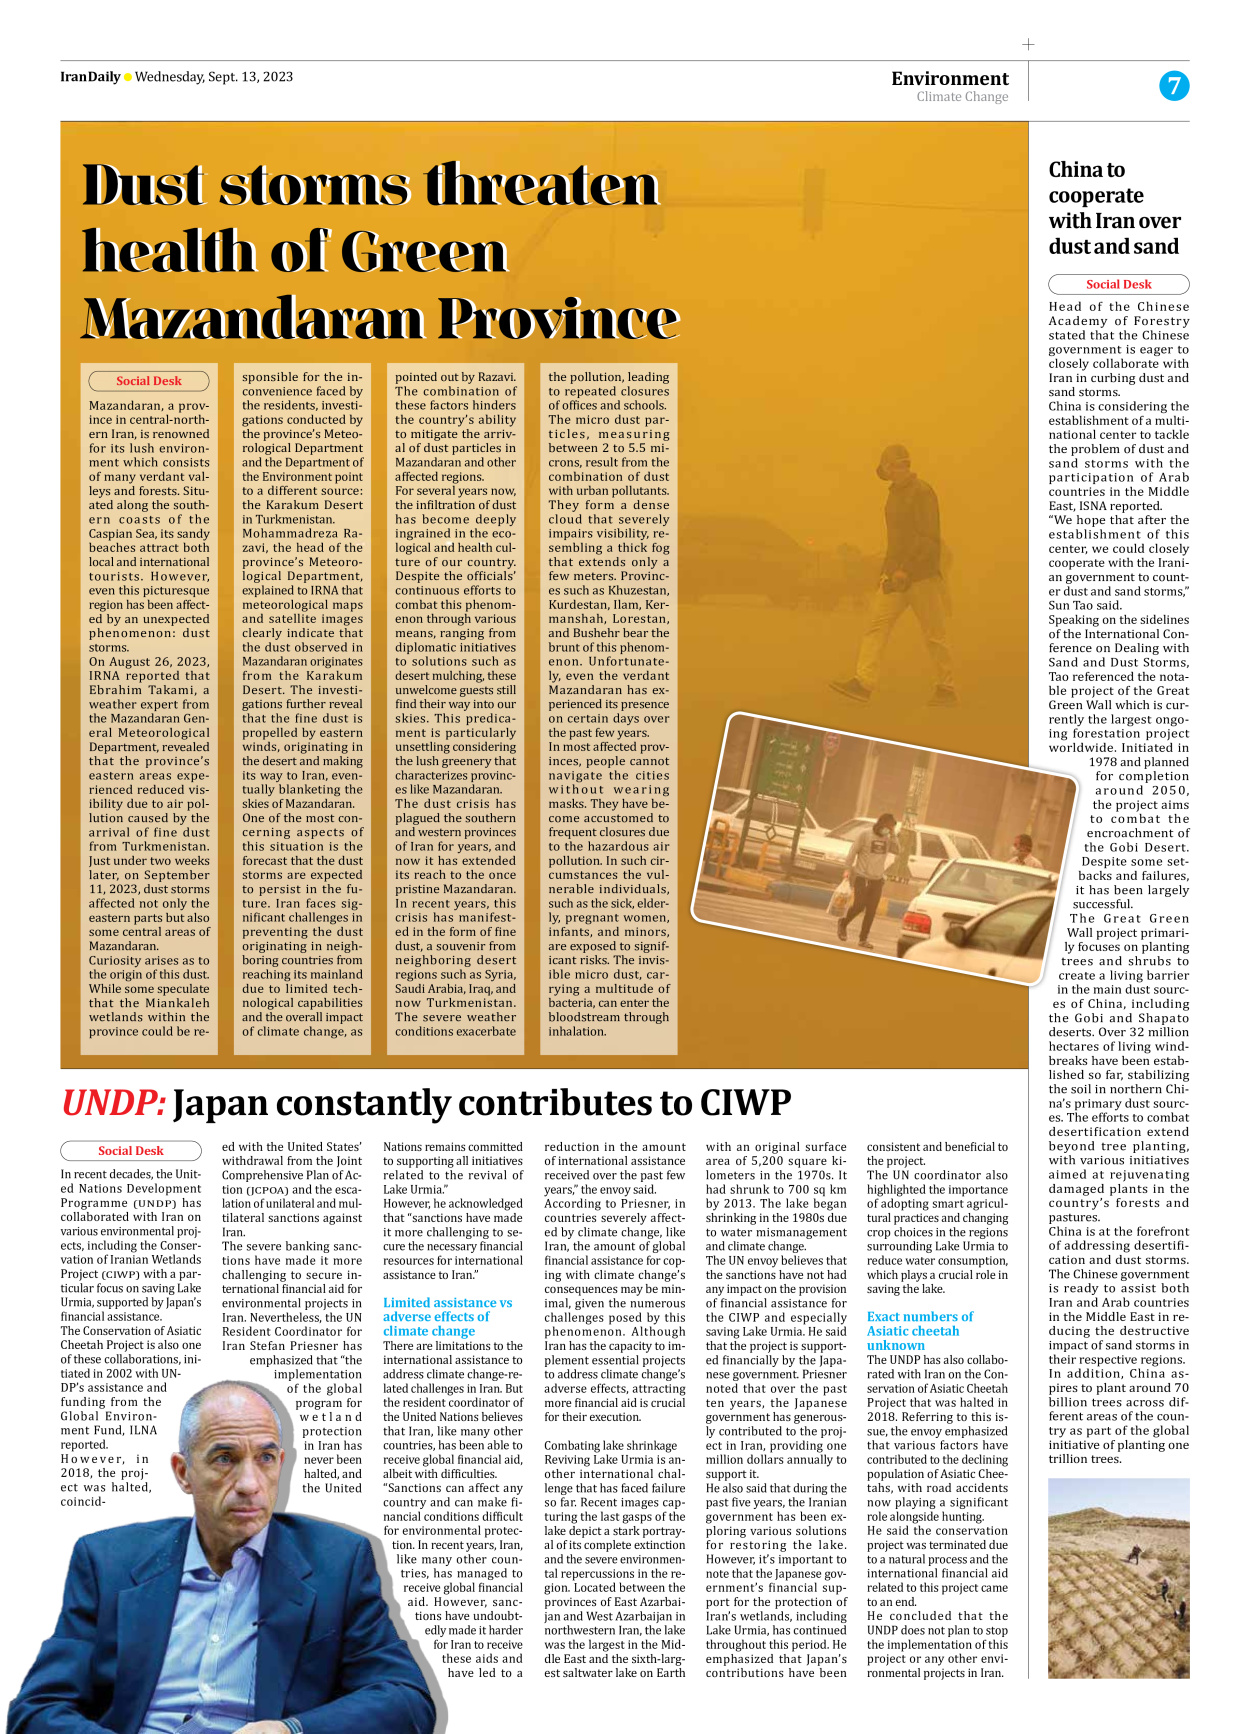 Iran Daily - Number Seven Thousand Three Hundred and Eighty Six - 13 September 2023 - Page 7